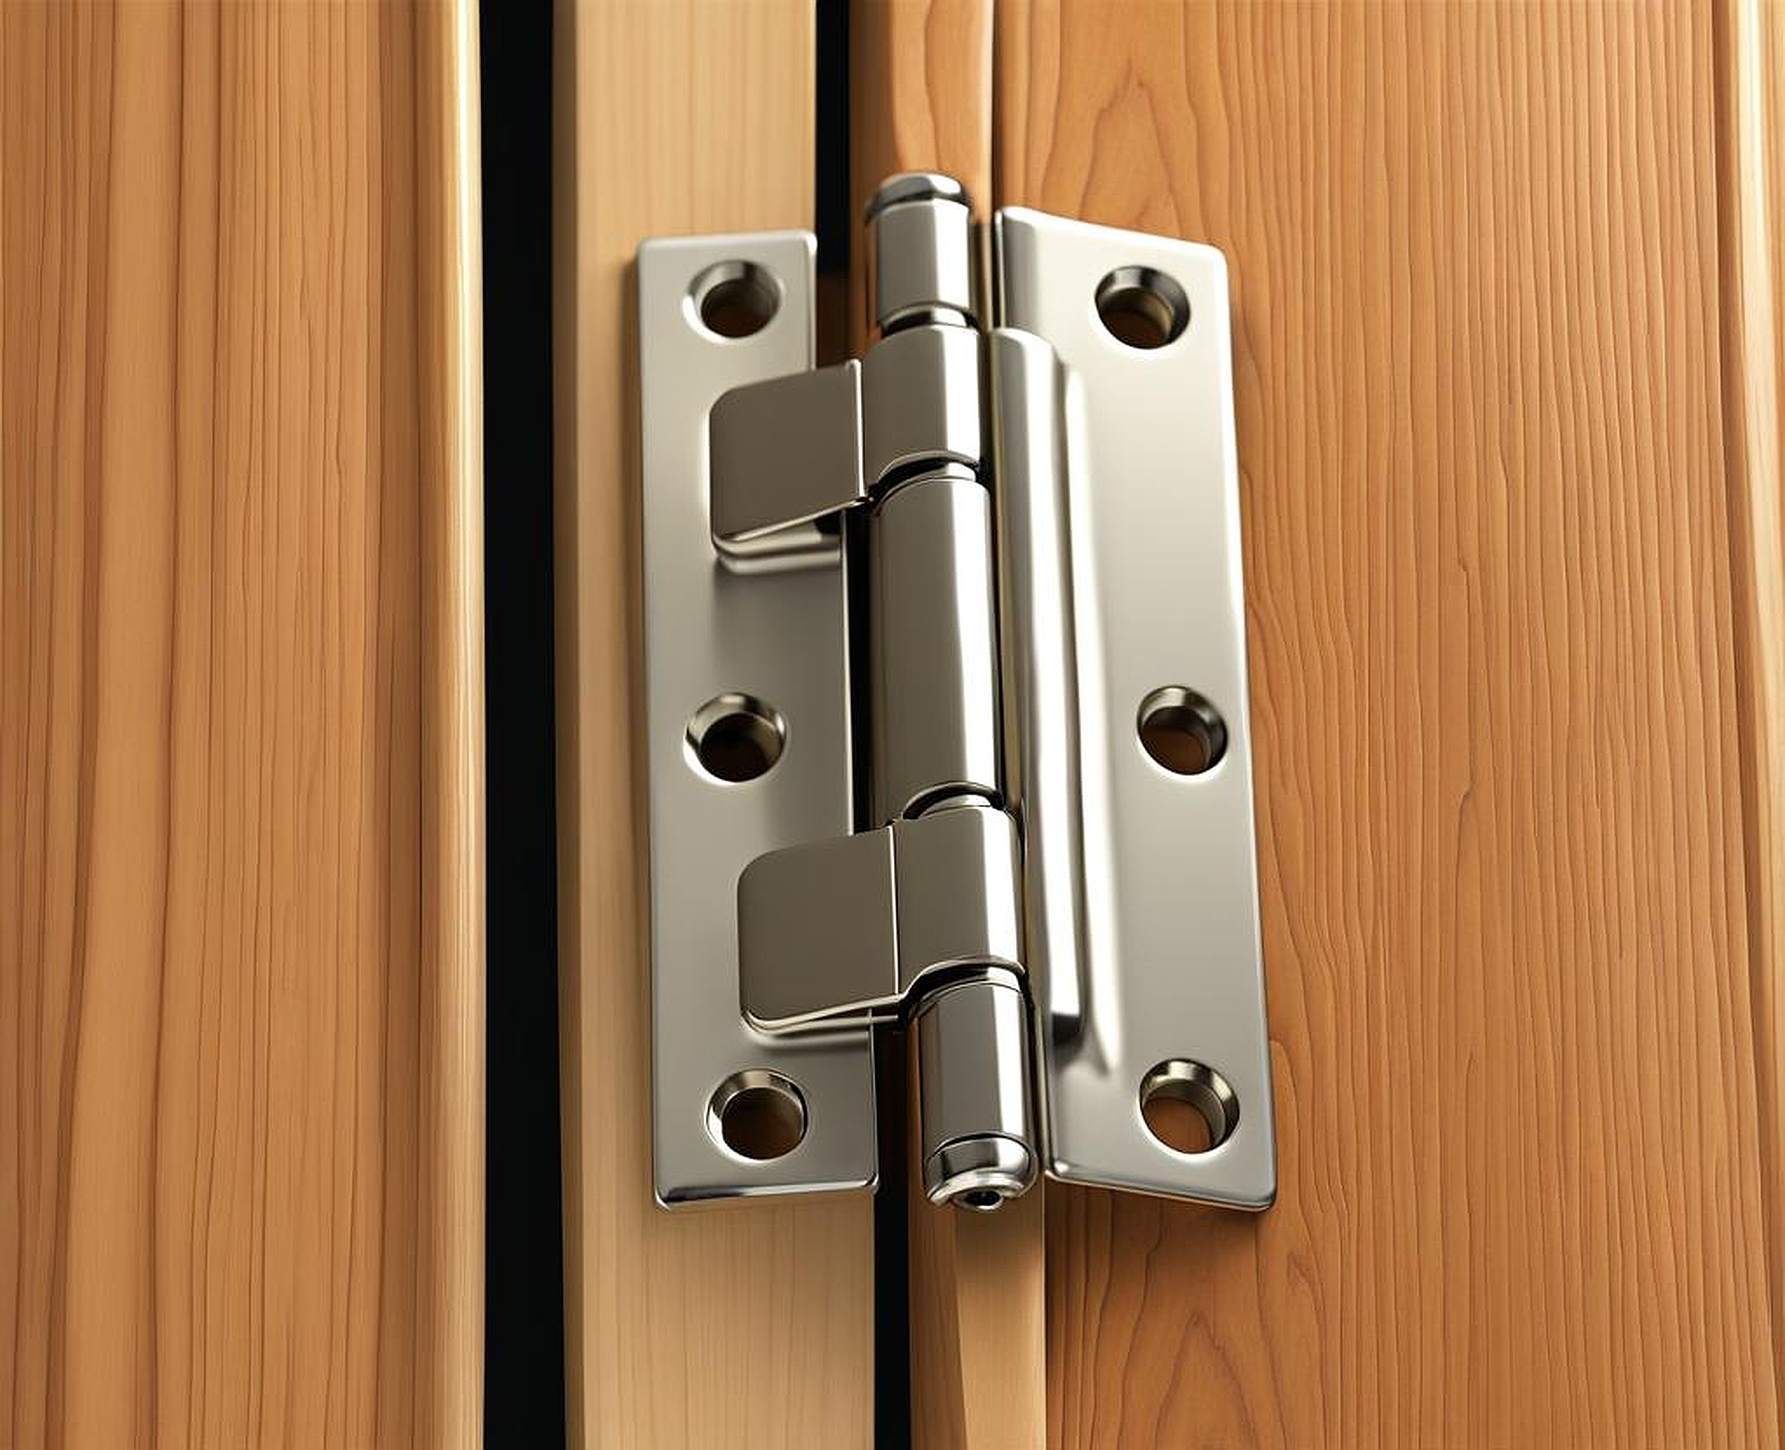 Inset Cabinet Door Hinge Types for a Wide Range of Kitchen Cabinet Styles